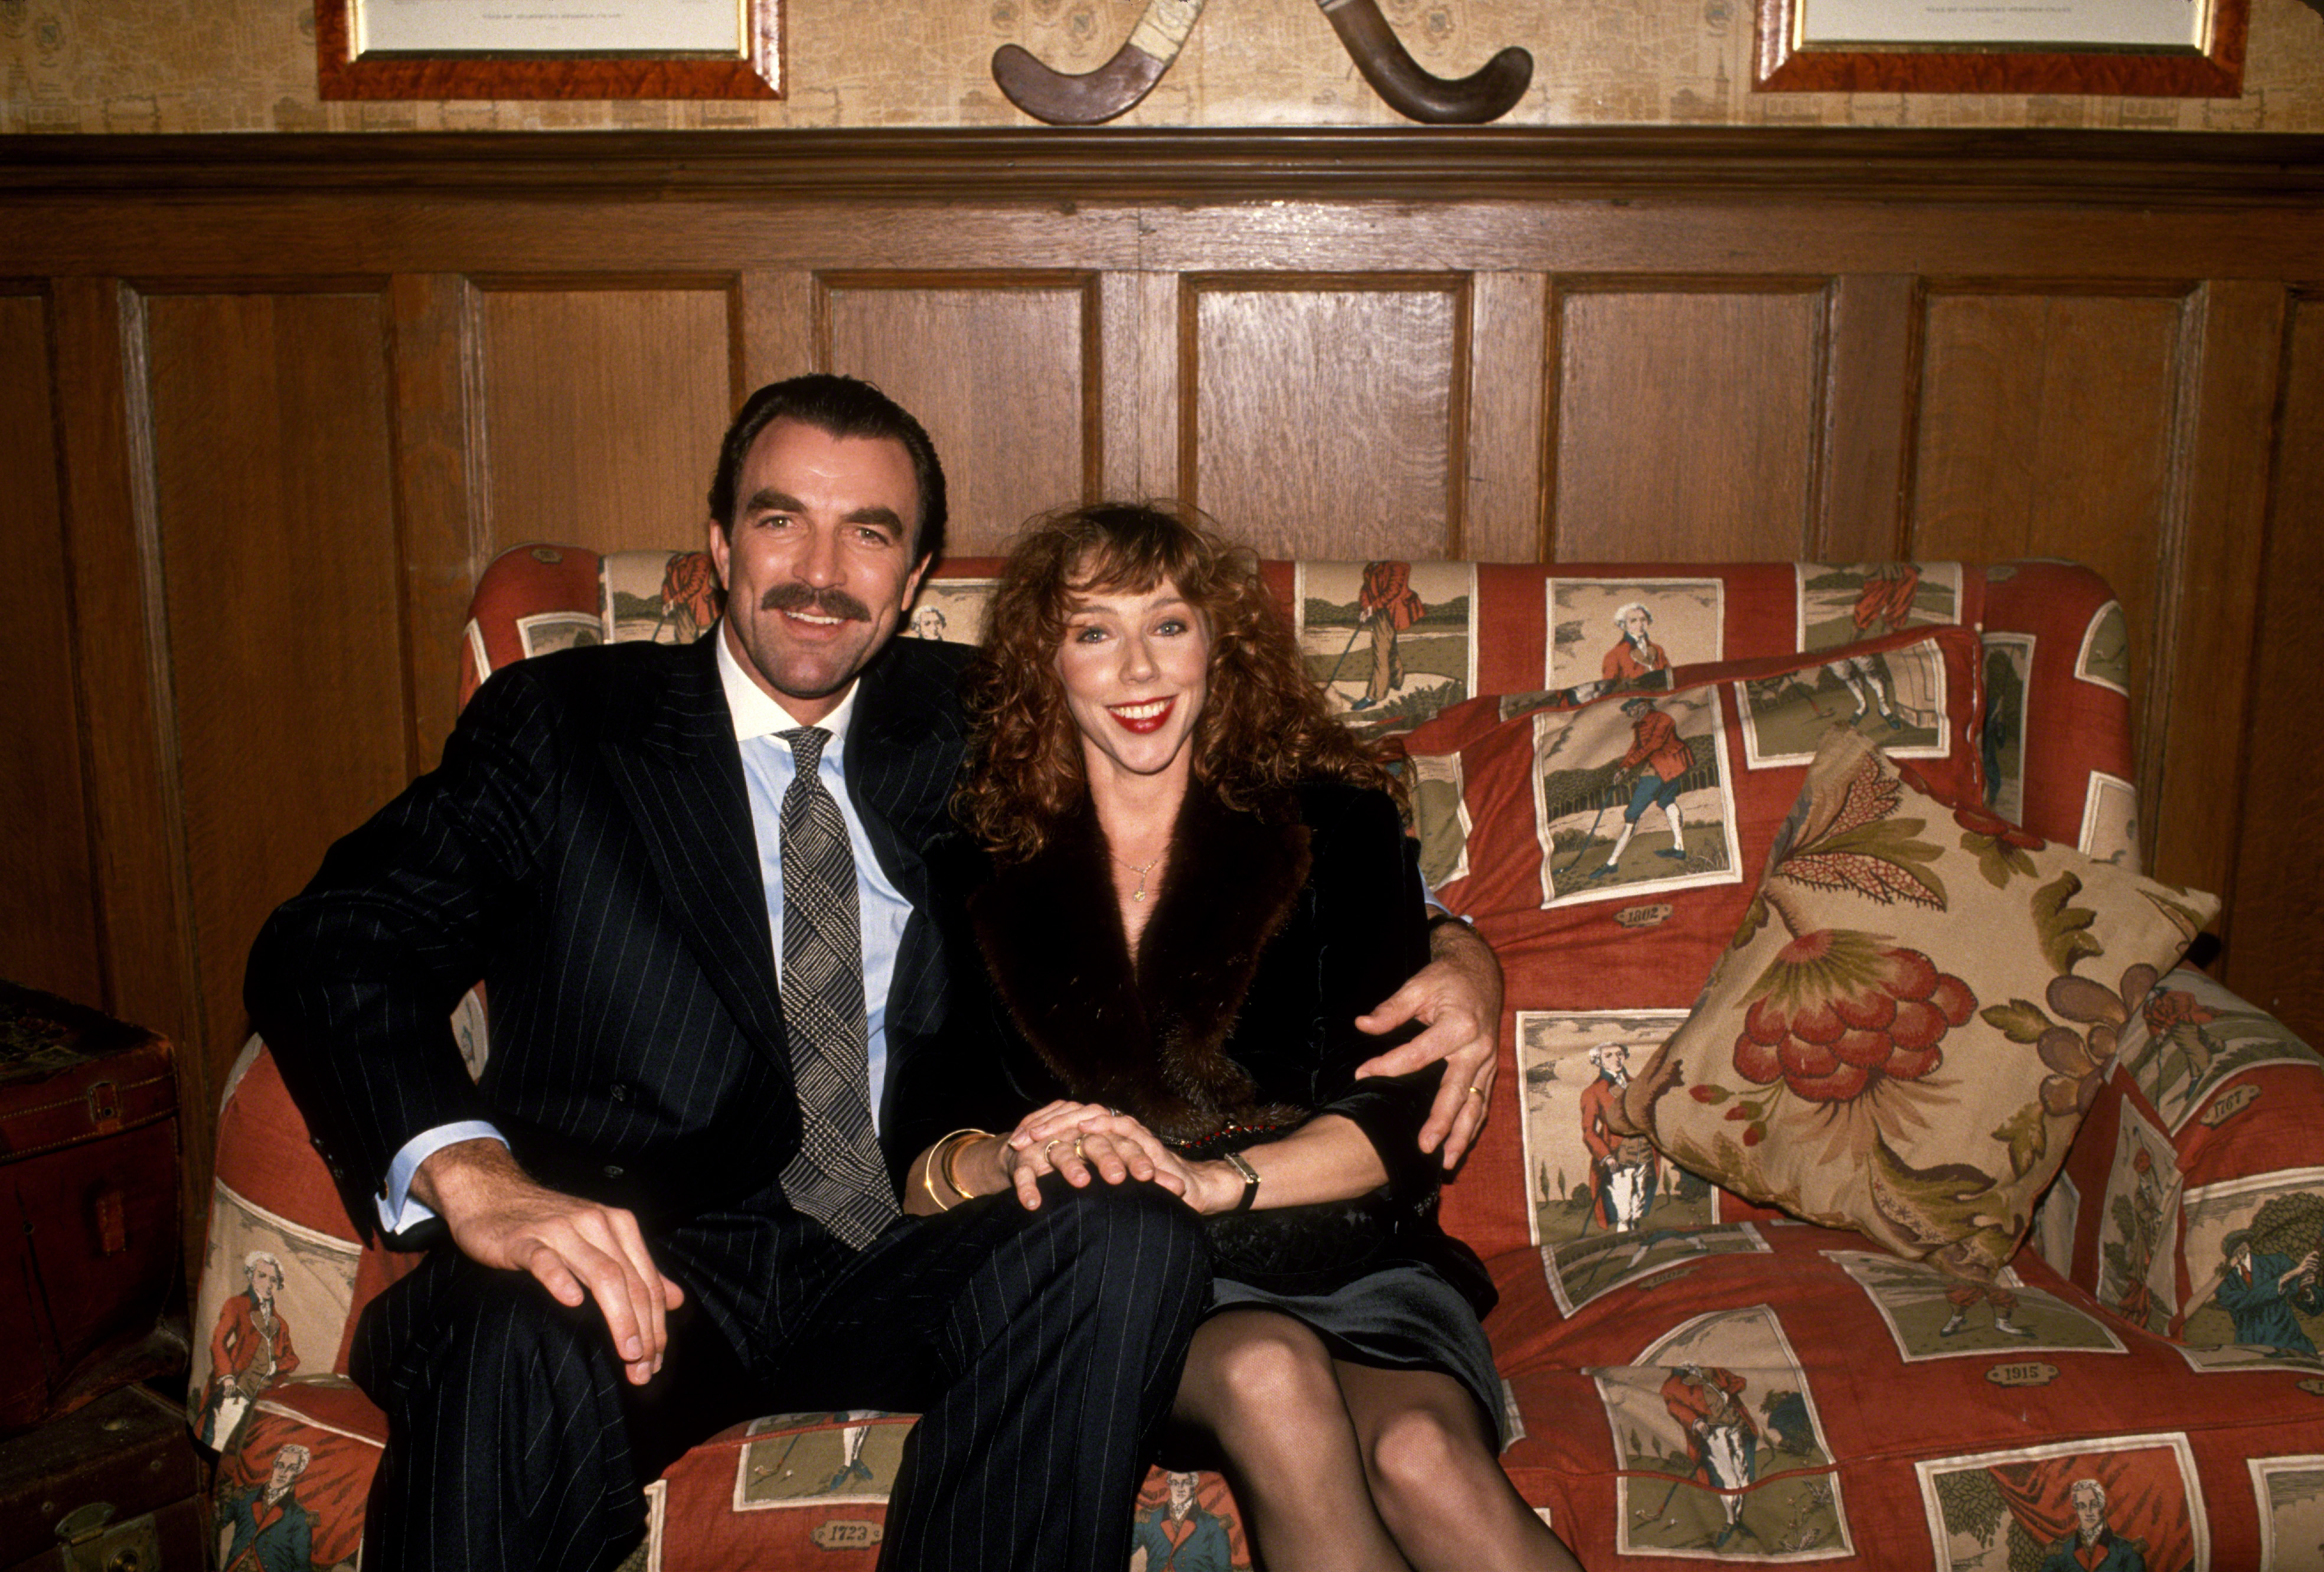 Tom Selleck and Jillie Mack in New York City; circa 1989. | Source: Getty Images